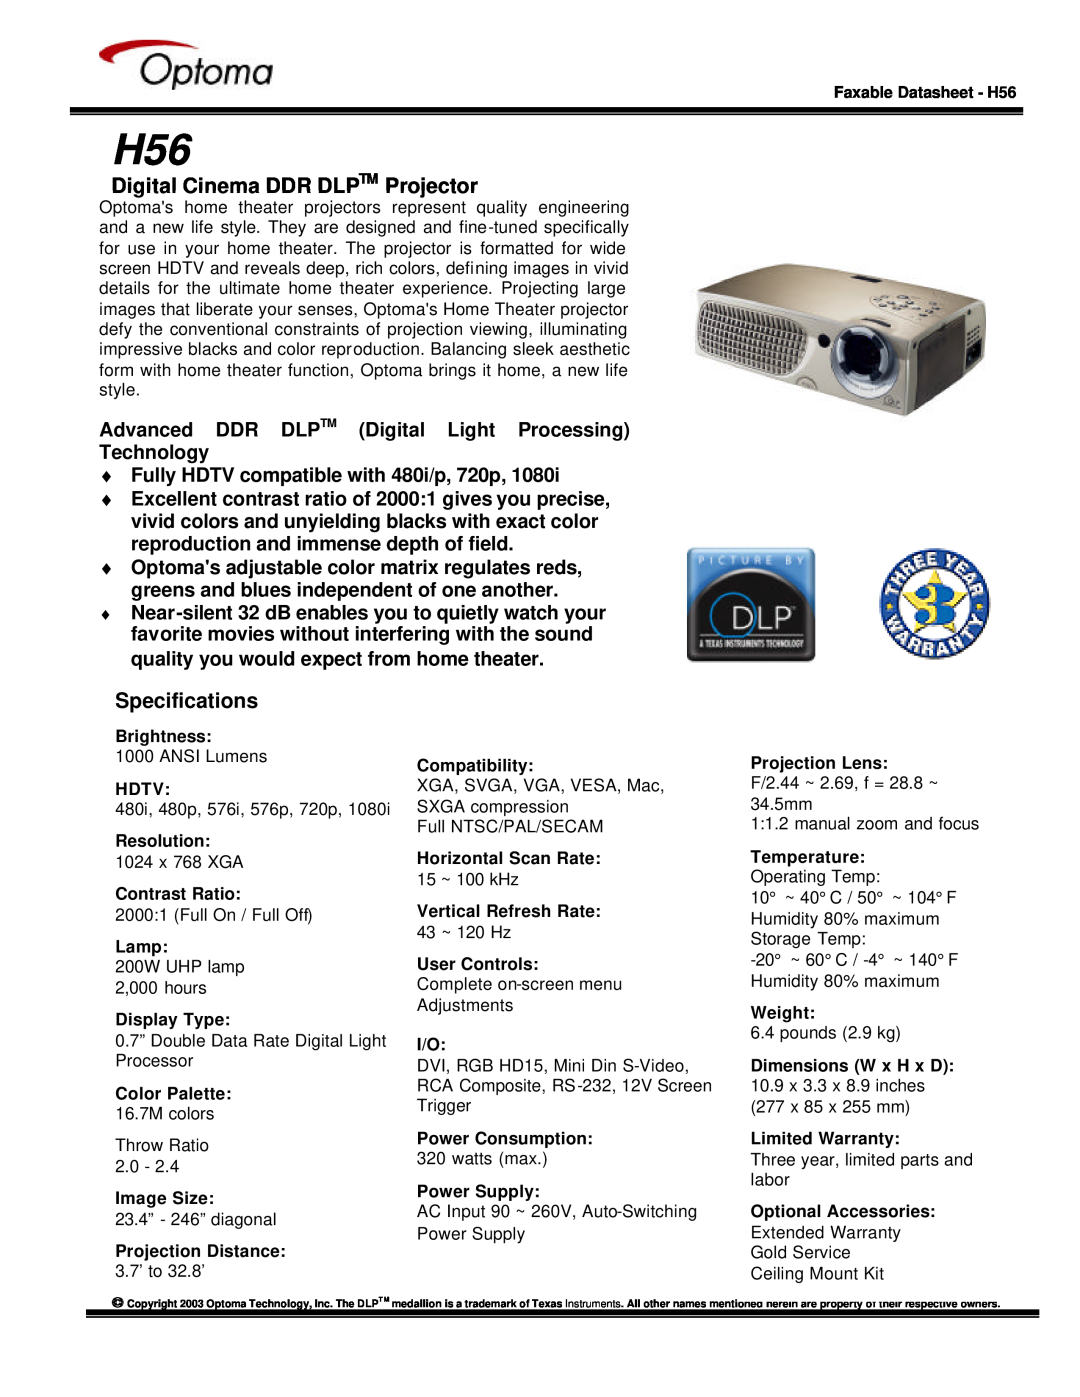 Optoma Technology H56 specifications Digital Cinema DDR DLPTM Projector, Specifications 